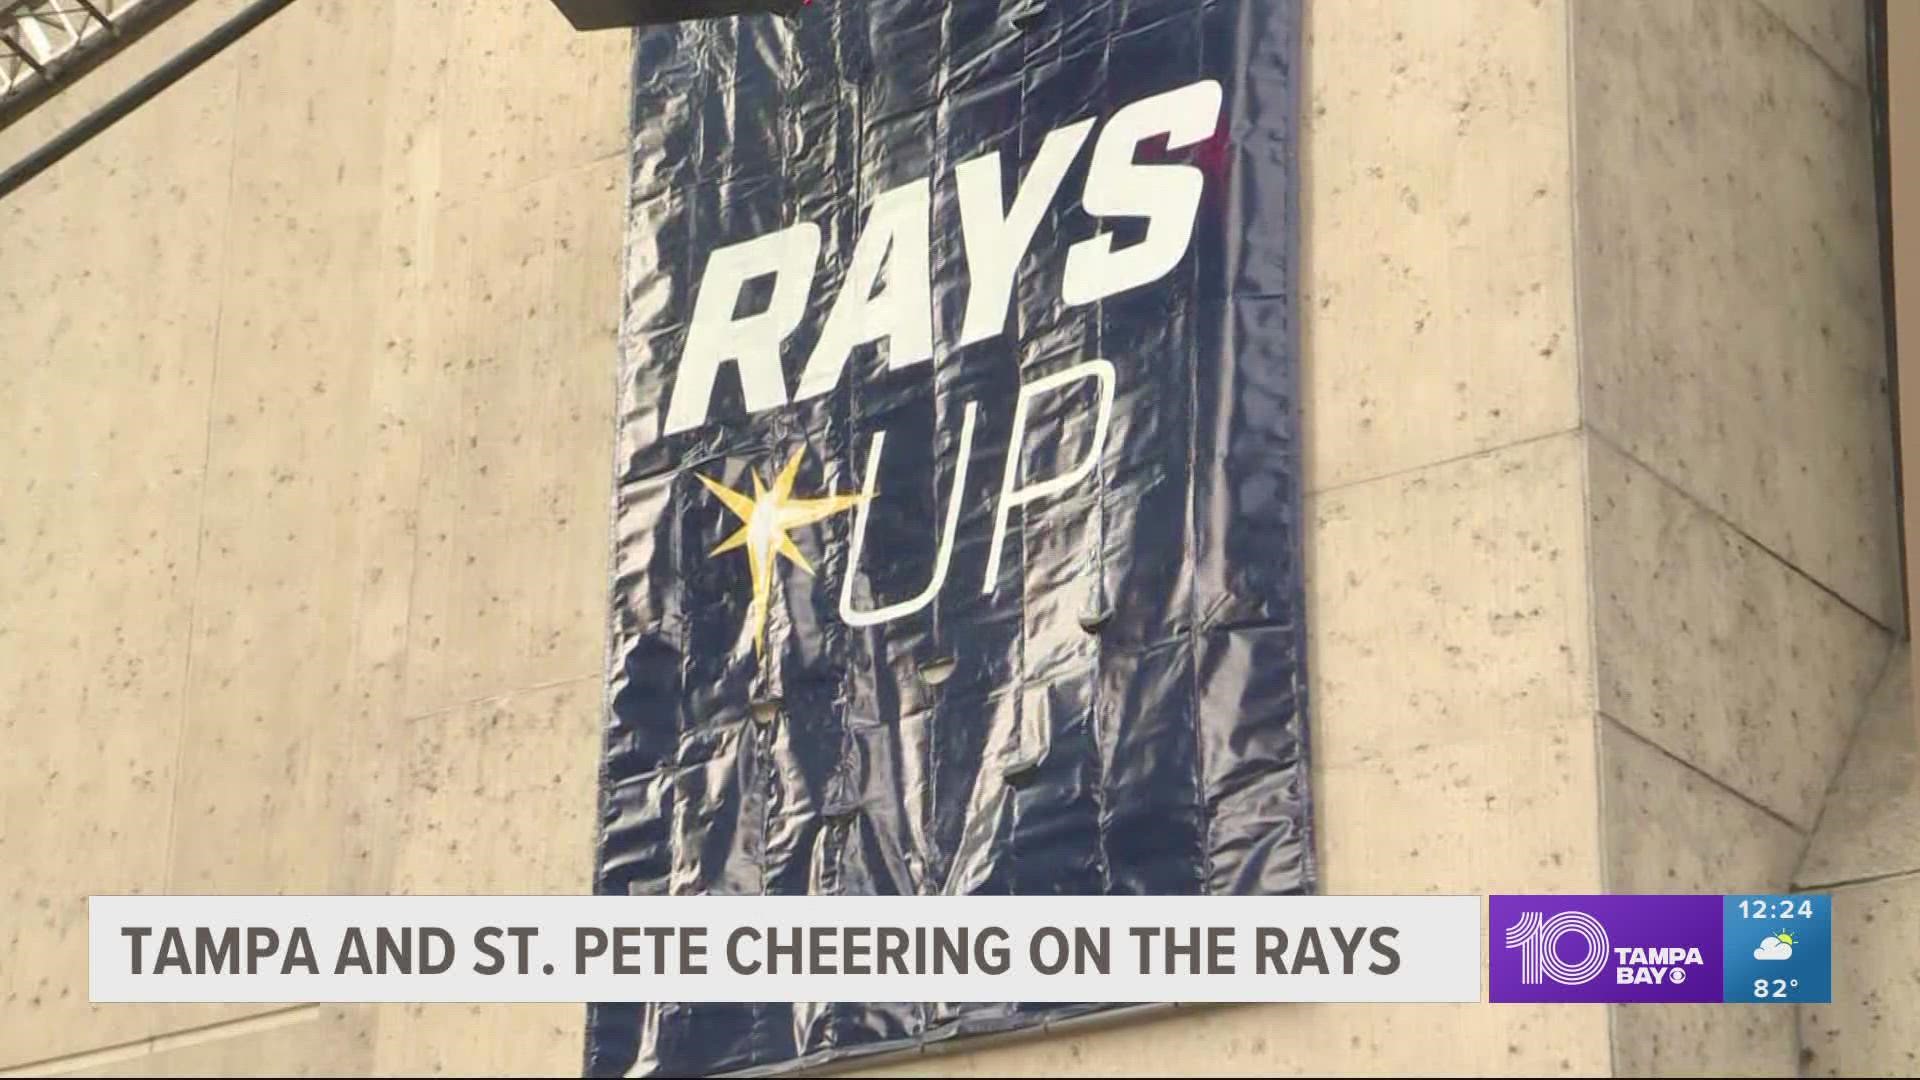 The Tampa Bay Rays are headed to the playoffs starting in Cleveland.